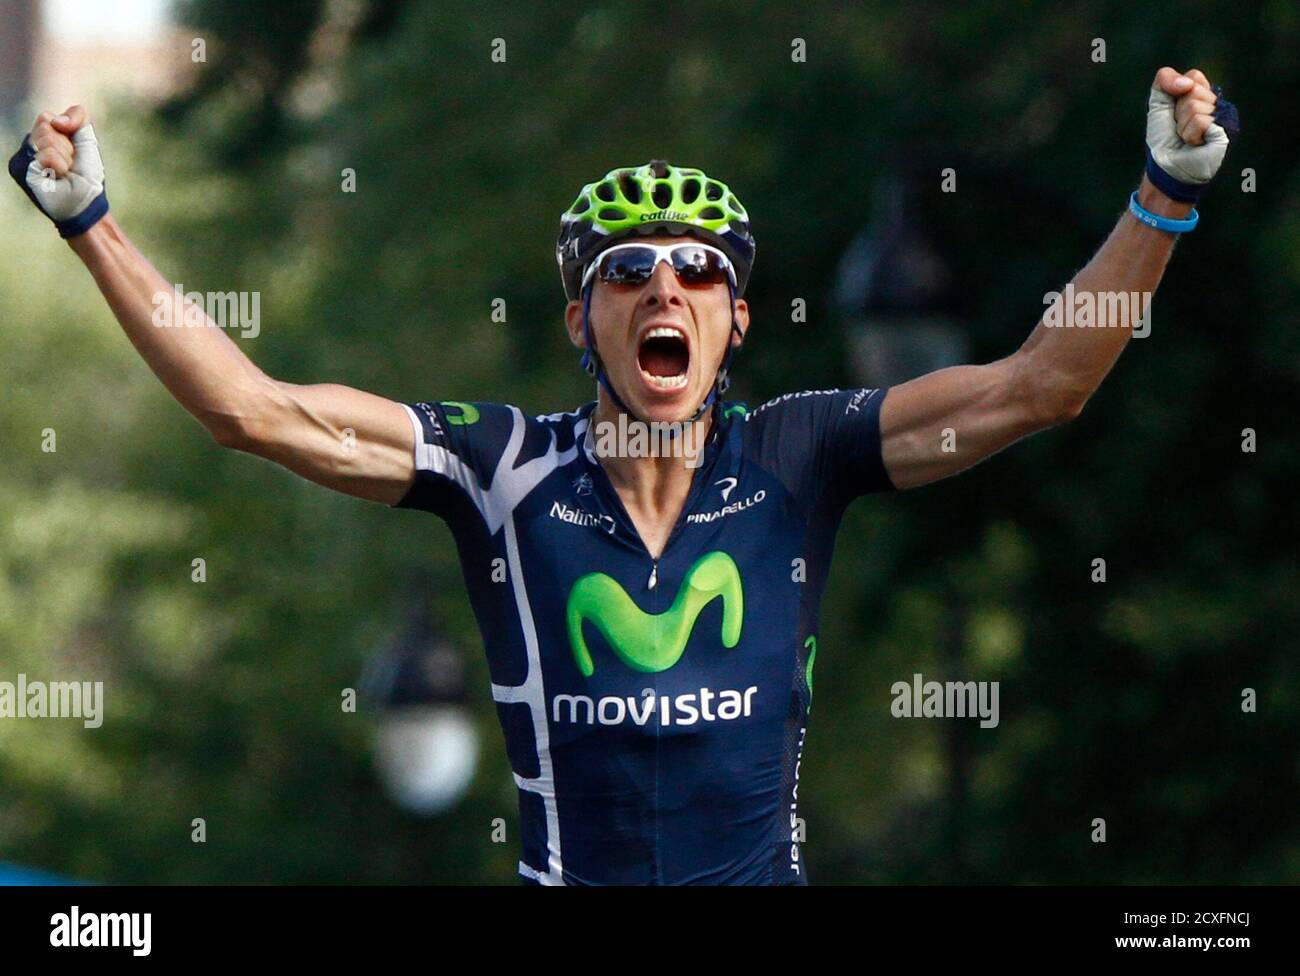 Movistar team rider Rui Faria da Costa of Portugal celebrates after winning  the Grand Prix de Montreal ProTour cycling race in Montreal September 11,  2011. REUTERS/Olivier Jean (CANADA - Tags: SPORT CYCLING